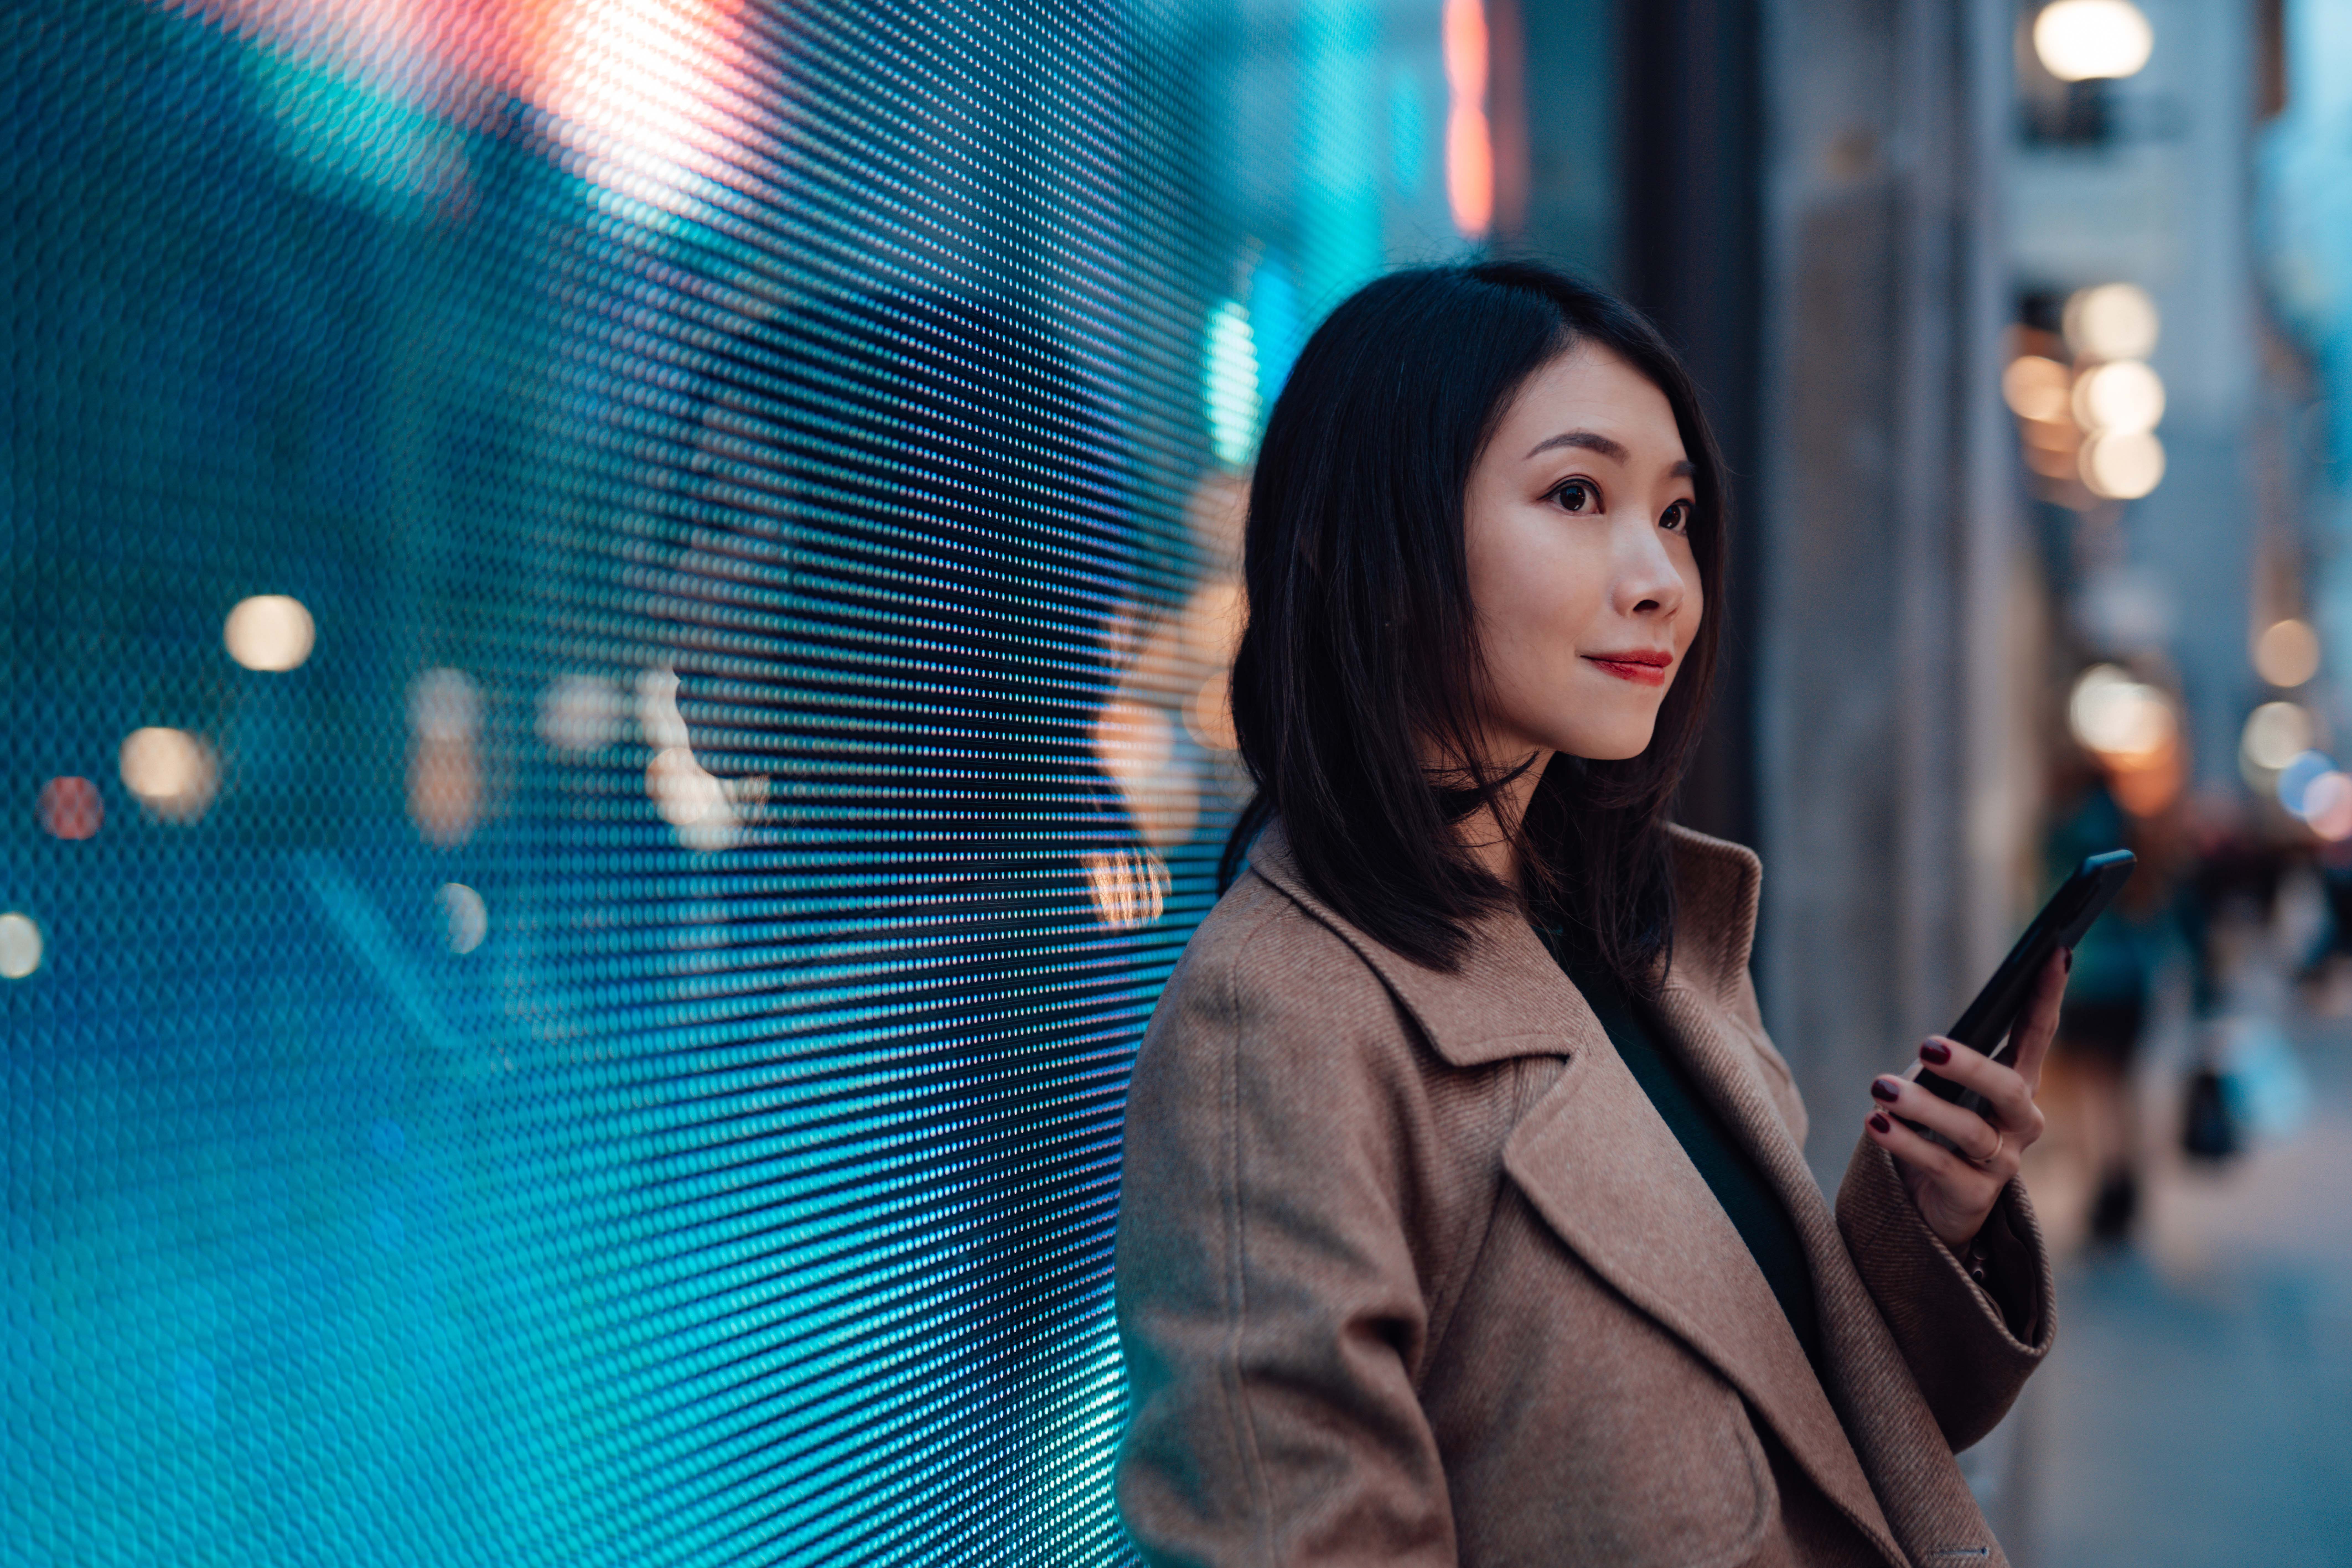 Woman in tan coat holding a cell phone